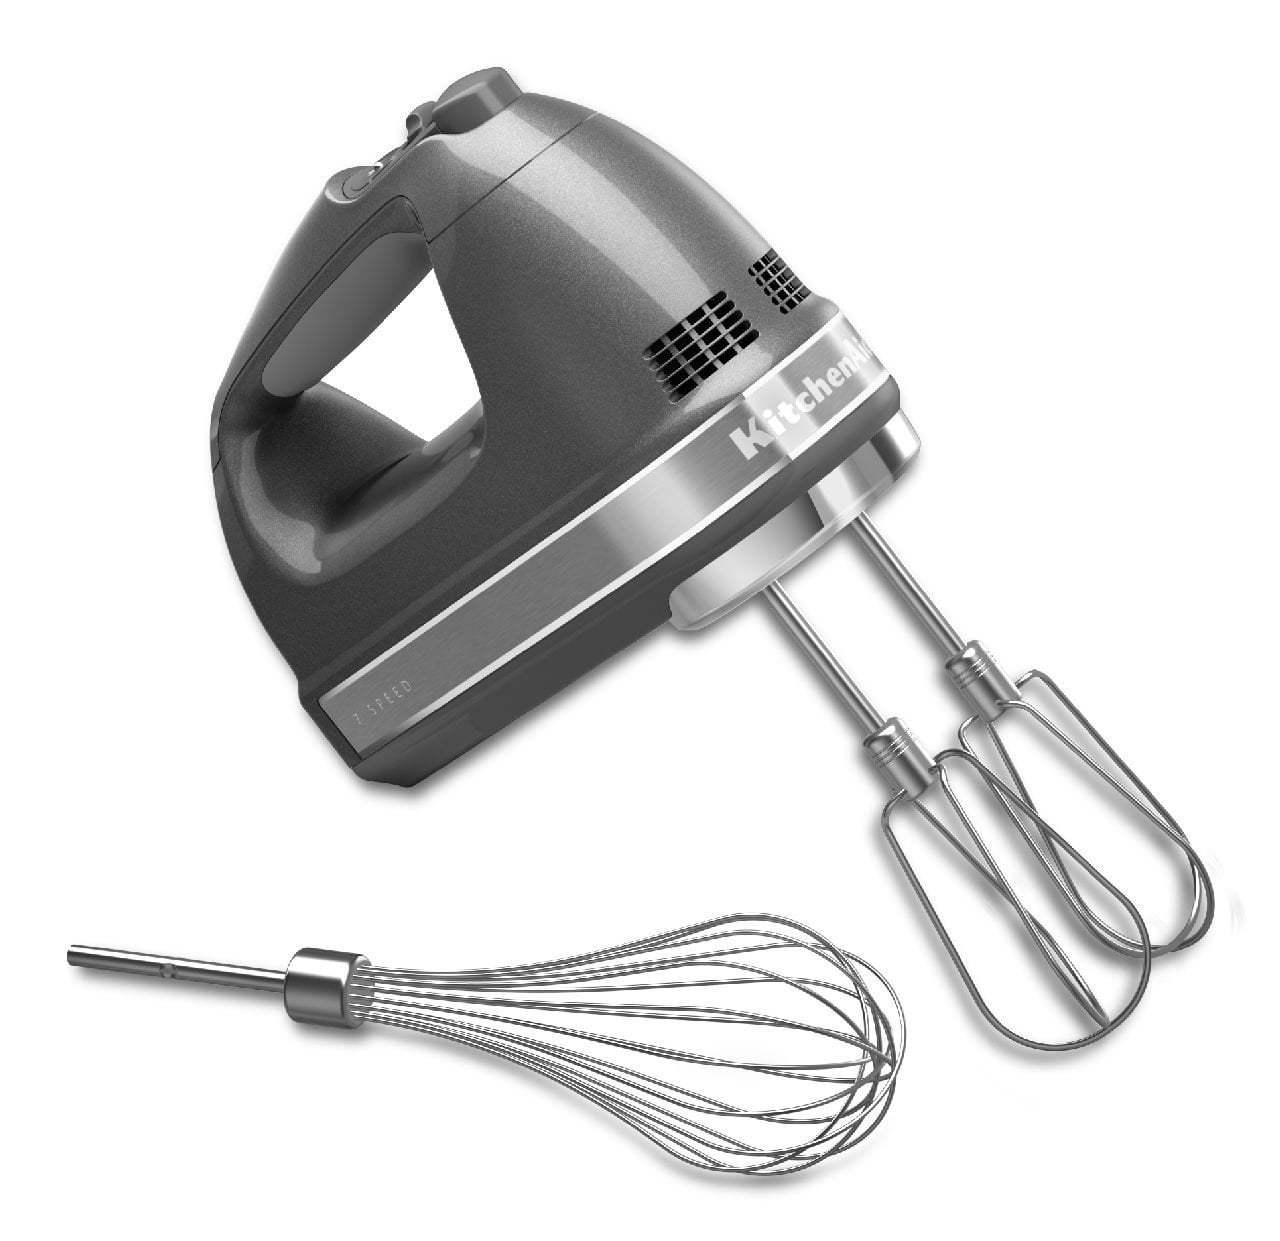  KitchenAid KHM7210WH 7-Speed Digital Hand Mixer with Turbo  Beater II Accessories and Pro Whisk - White & KHMFEB2 Flex Edge Beater  Accessory for Hand Mixer, One Size, Stainless Steel: Home 